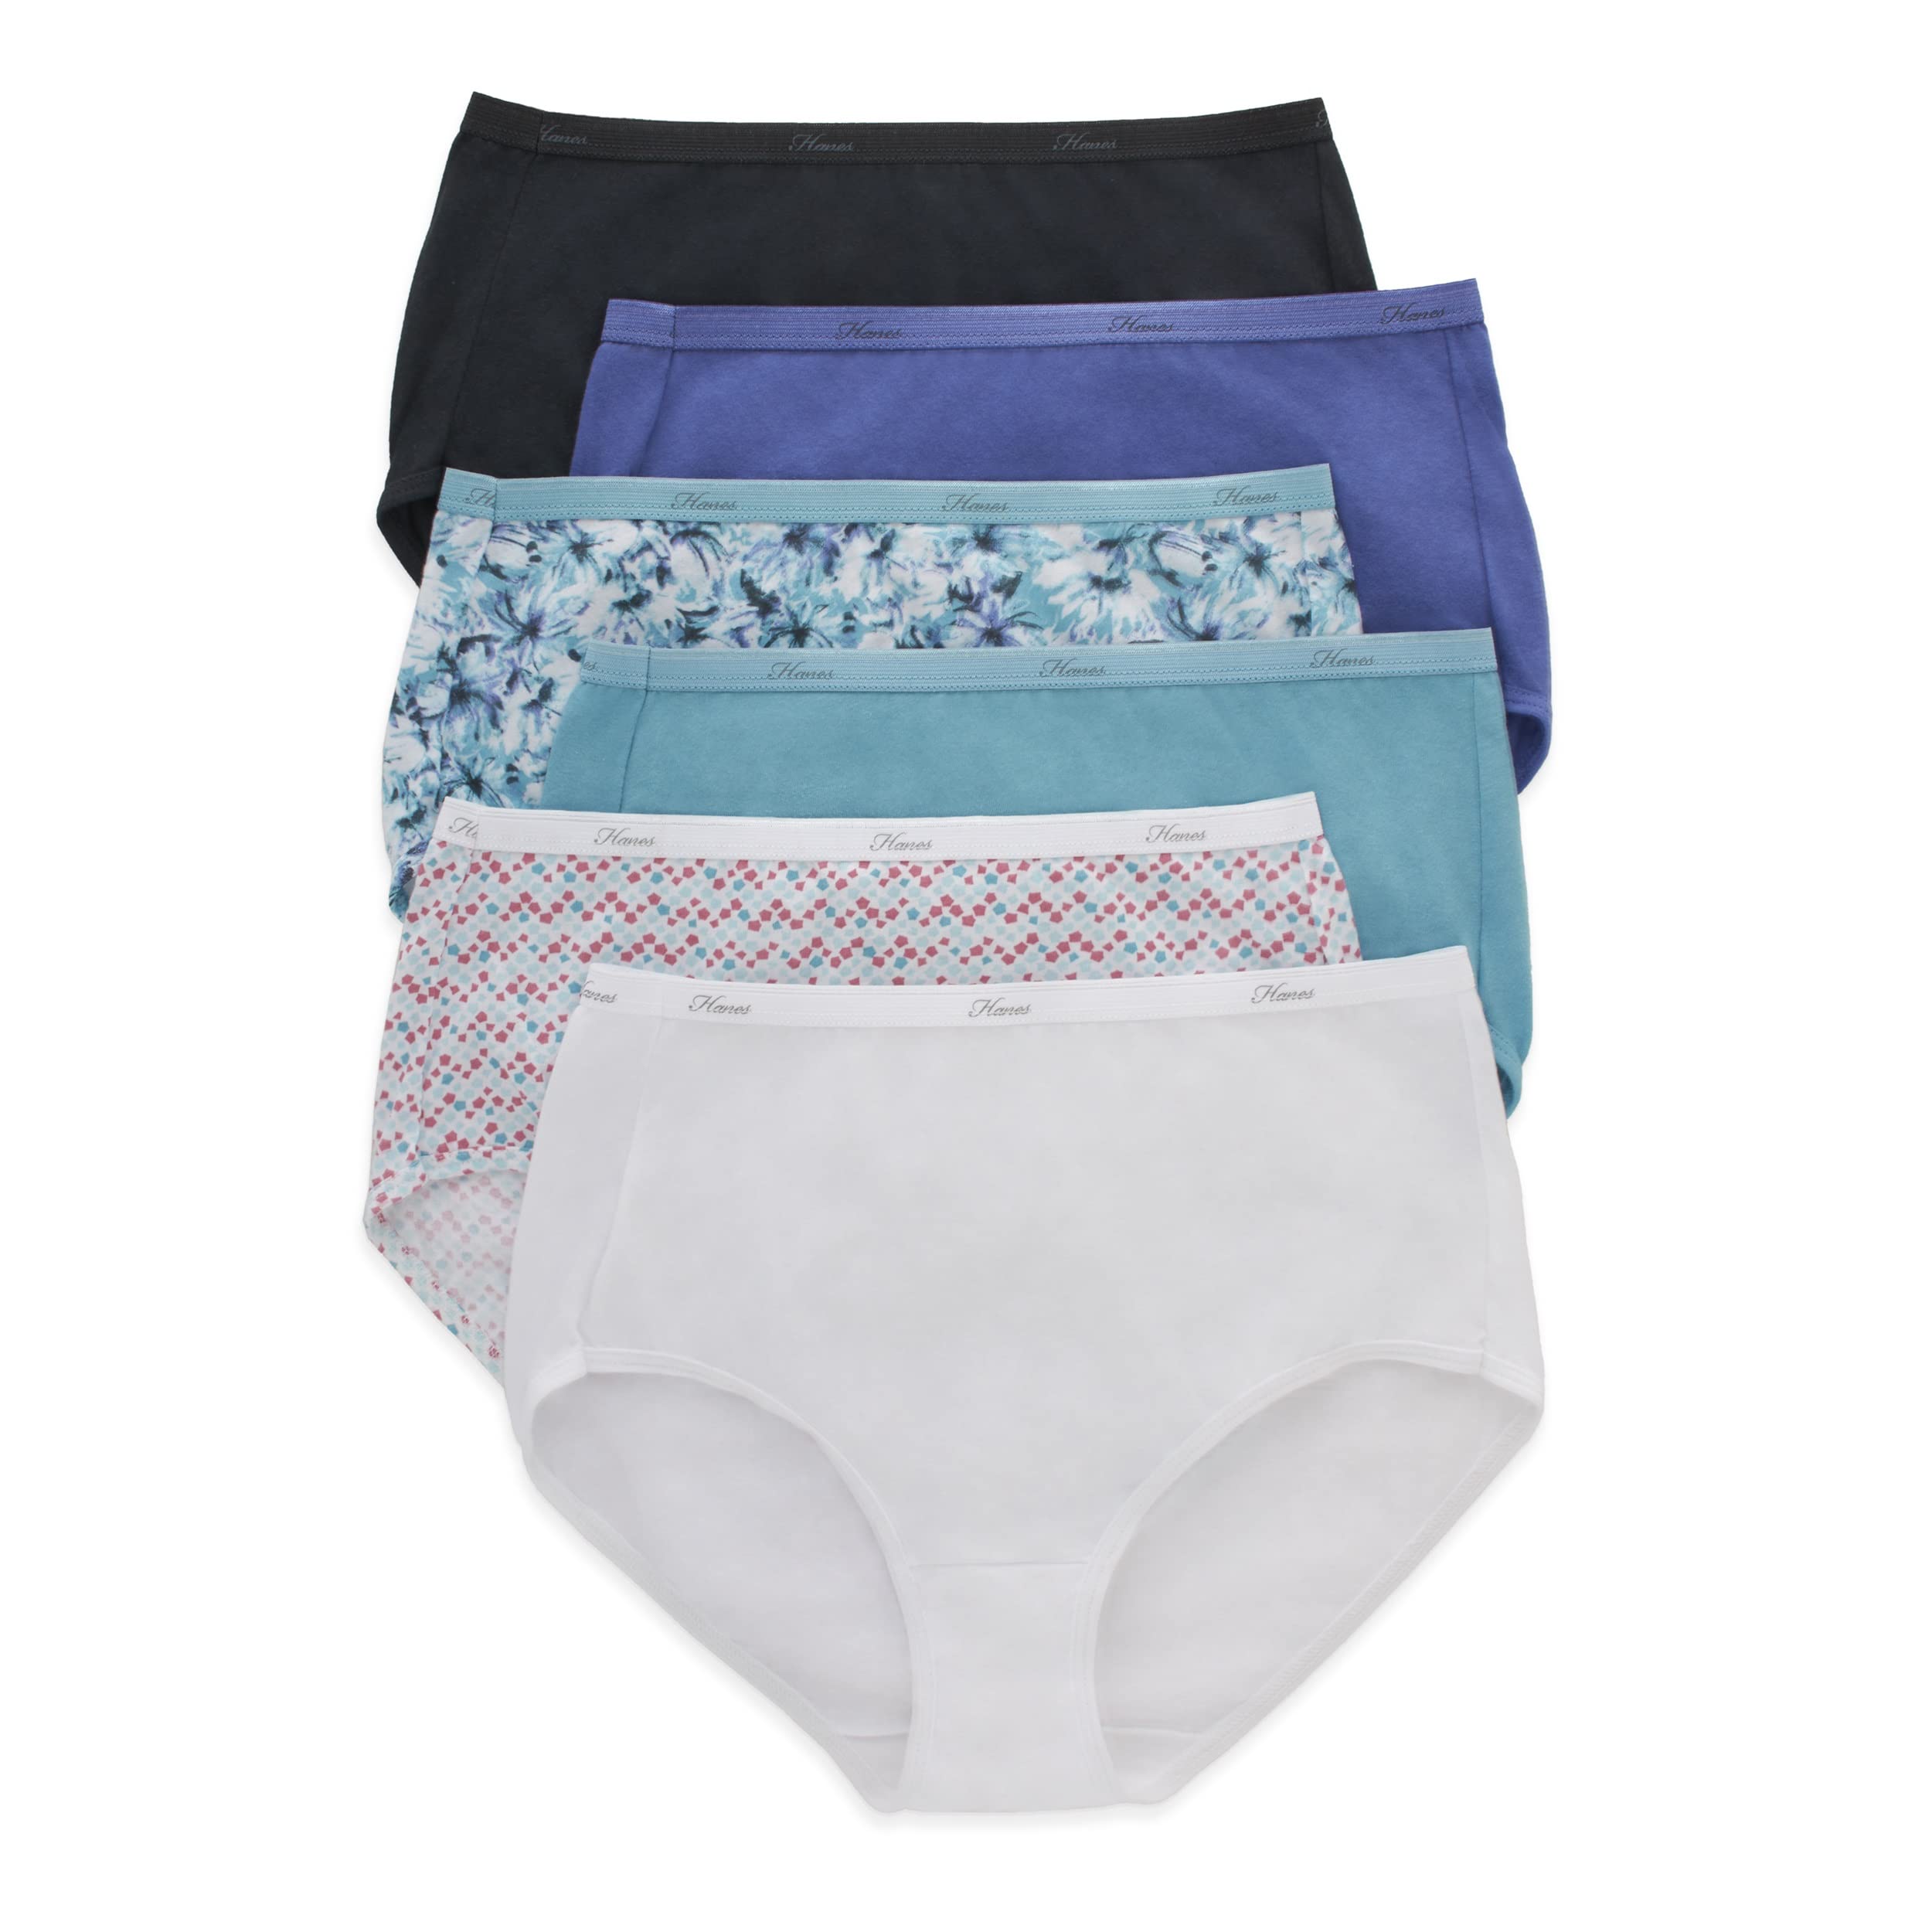 Hanes Women's Signature Cotton Breathe Briefs Underwear Pack, 6-Pack (Colors May Vary)